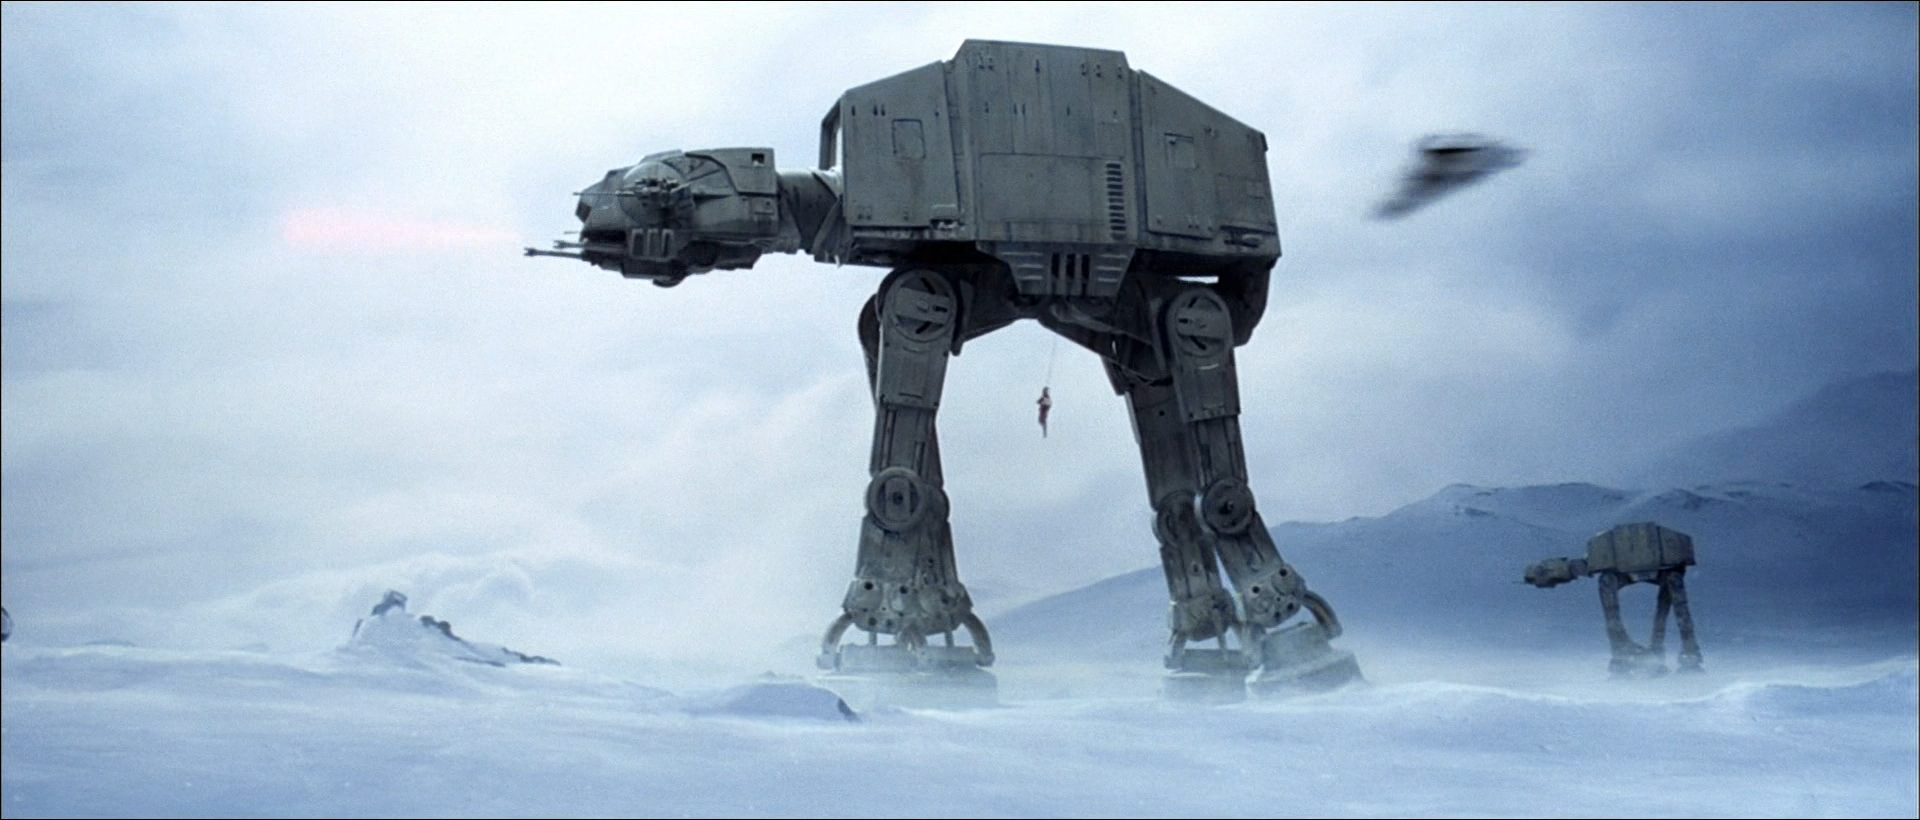 05 - The Empire Strikes Back 1080P.wmv_snapshot_00.32.39_[2010.08.21_21.20.57].png